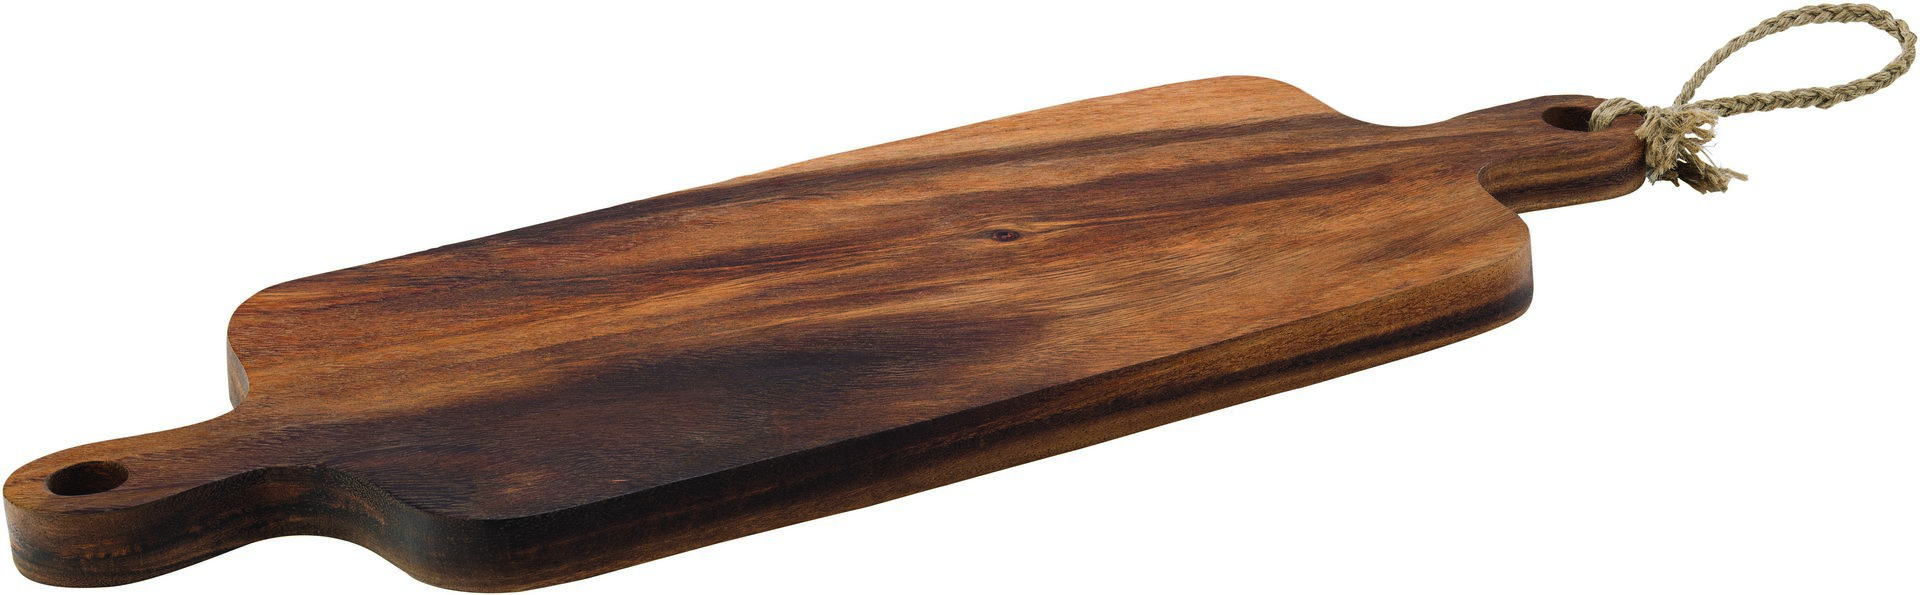 Discovery Double Handled Board 24.5